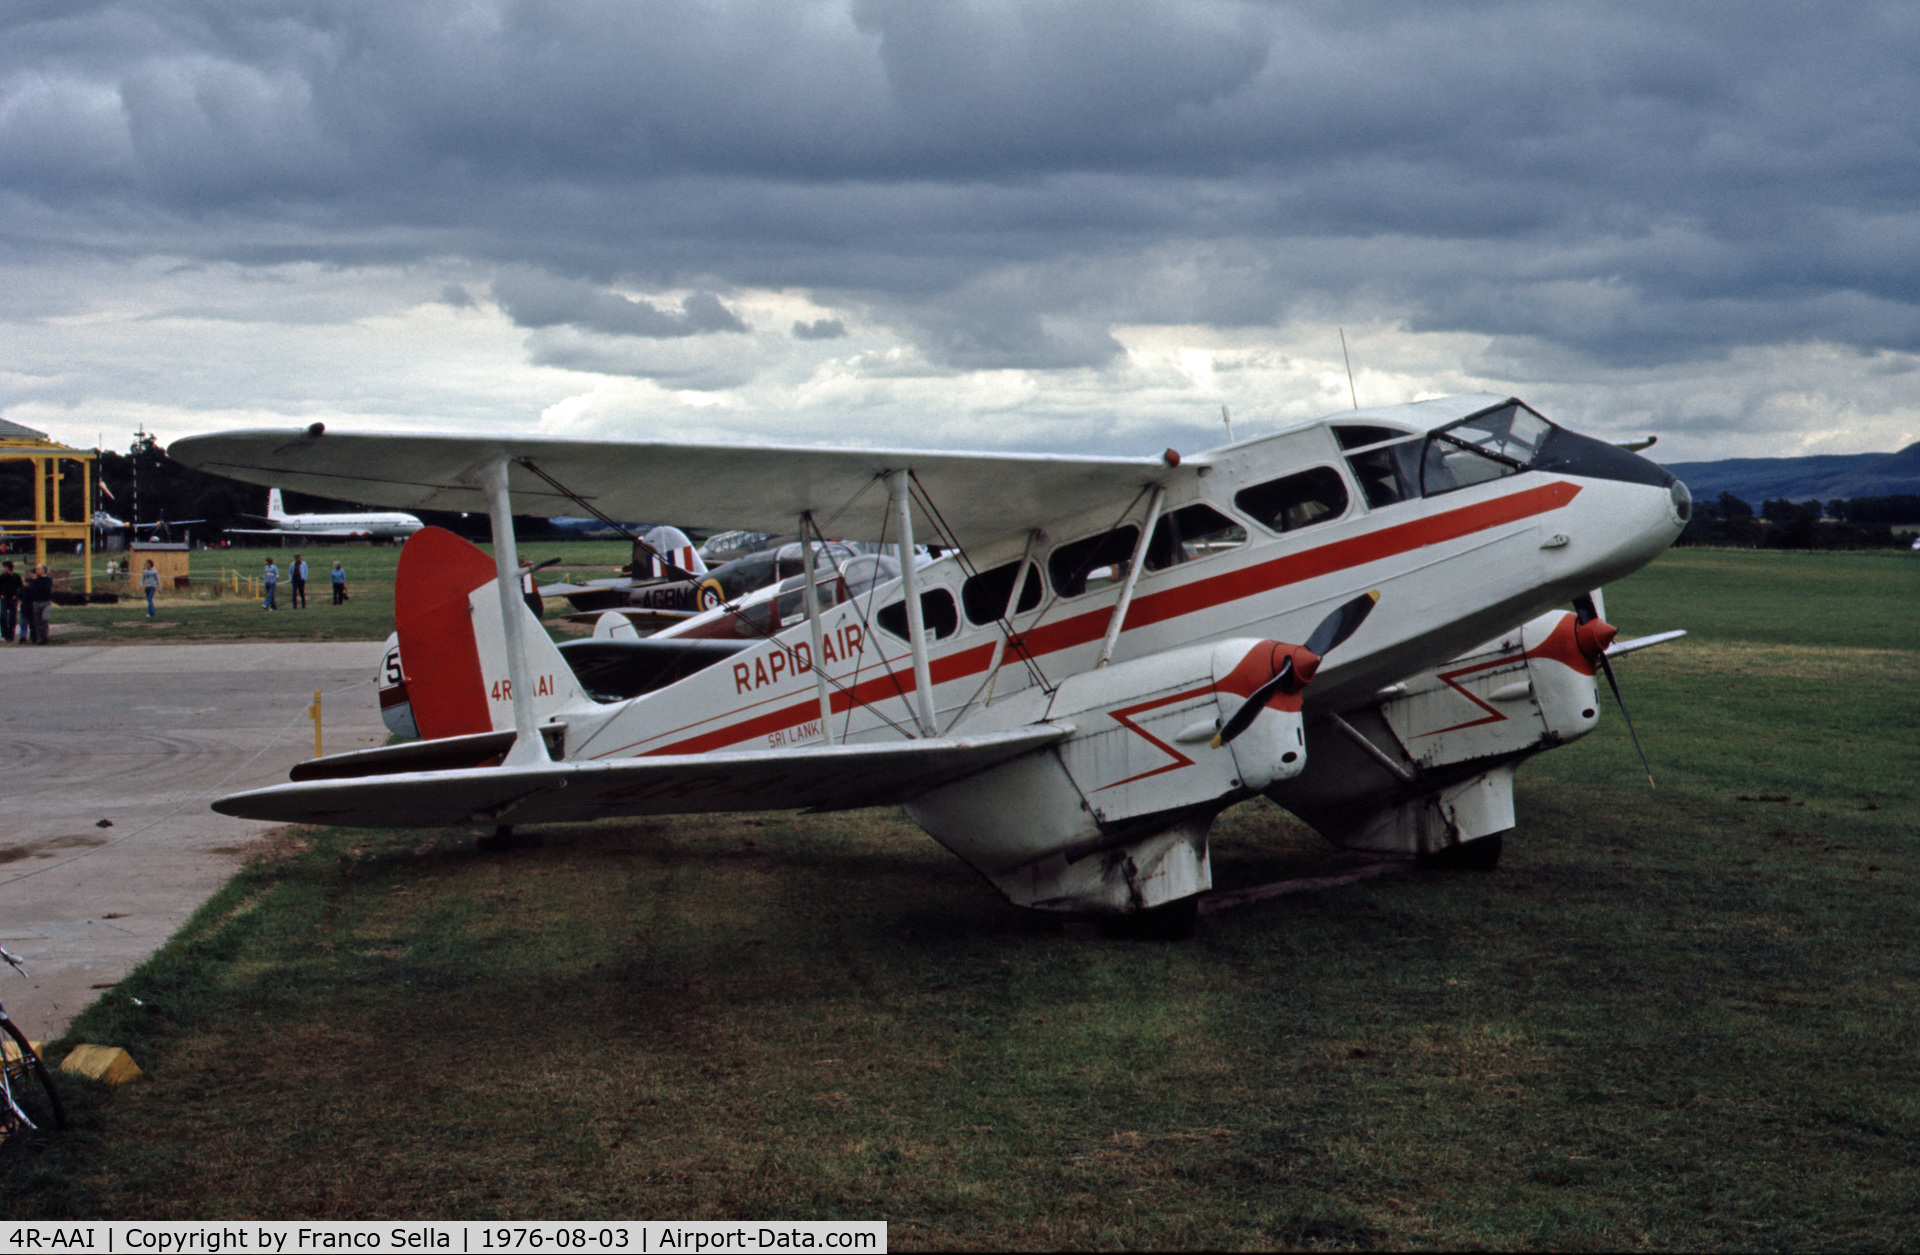 4R-AAI, 1944 De Havilland DH-89A Dominie/Dragon Rapide C/N 6736, De Havilland DH.89A Dragon Rapide 4R-AAI at the Strathallan Collection, August 1976. Now re-registered G-ALXT and at the Science Museum, Wroughton.